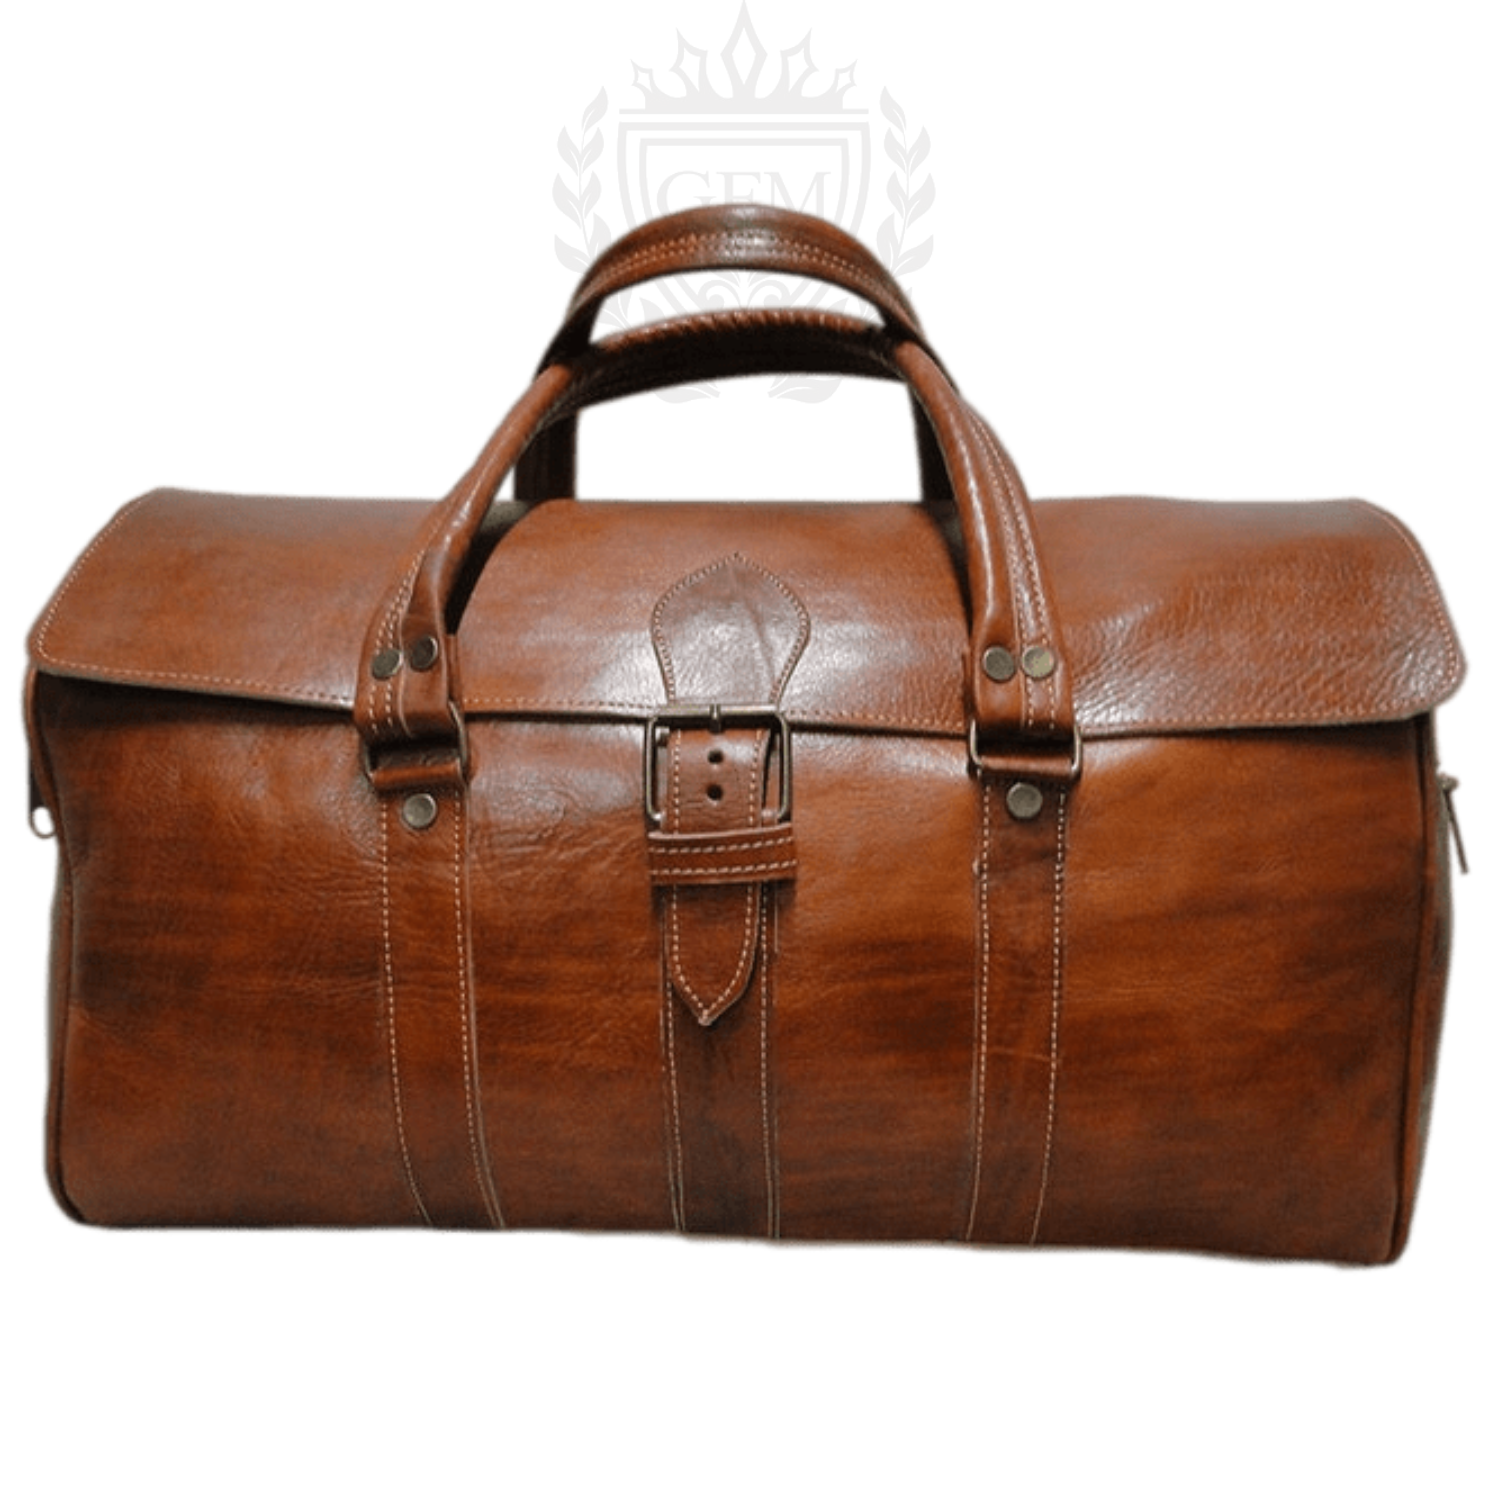 Handwoven Moroccan Weekender Bag - Authentic Leather Travel Companion